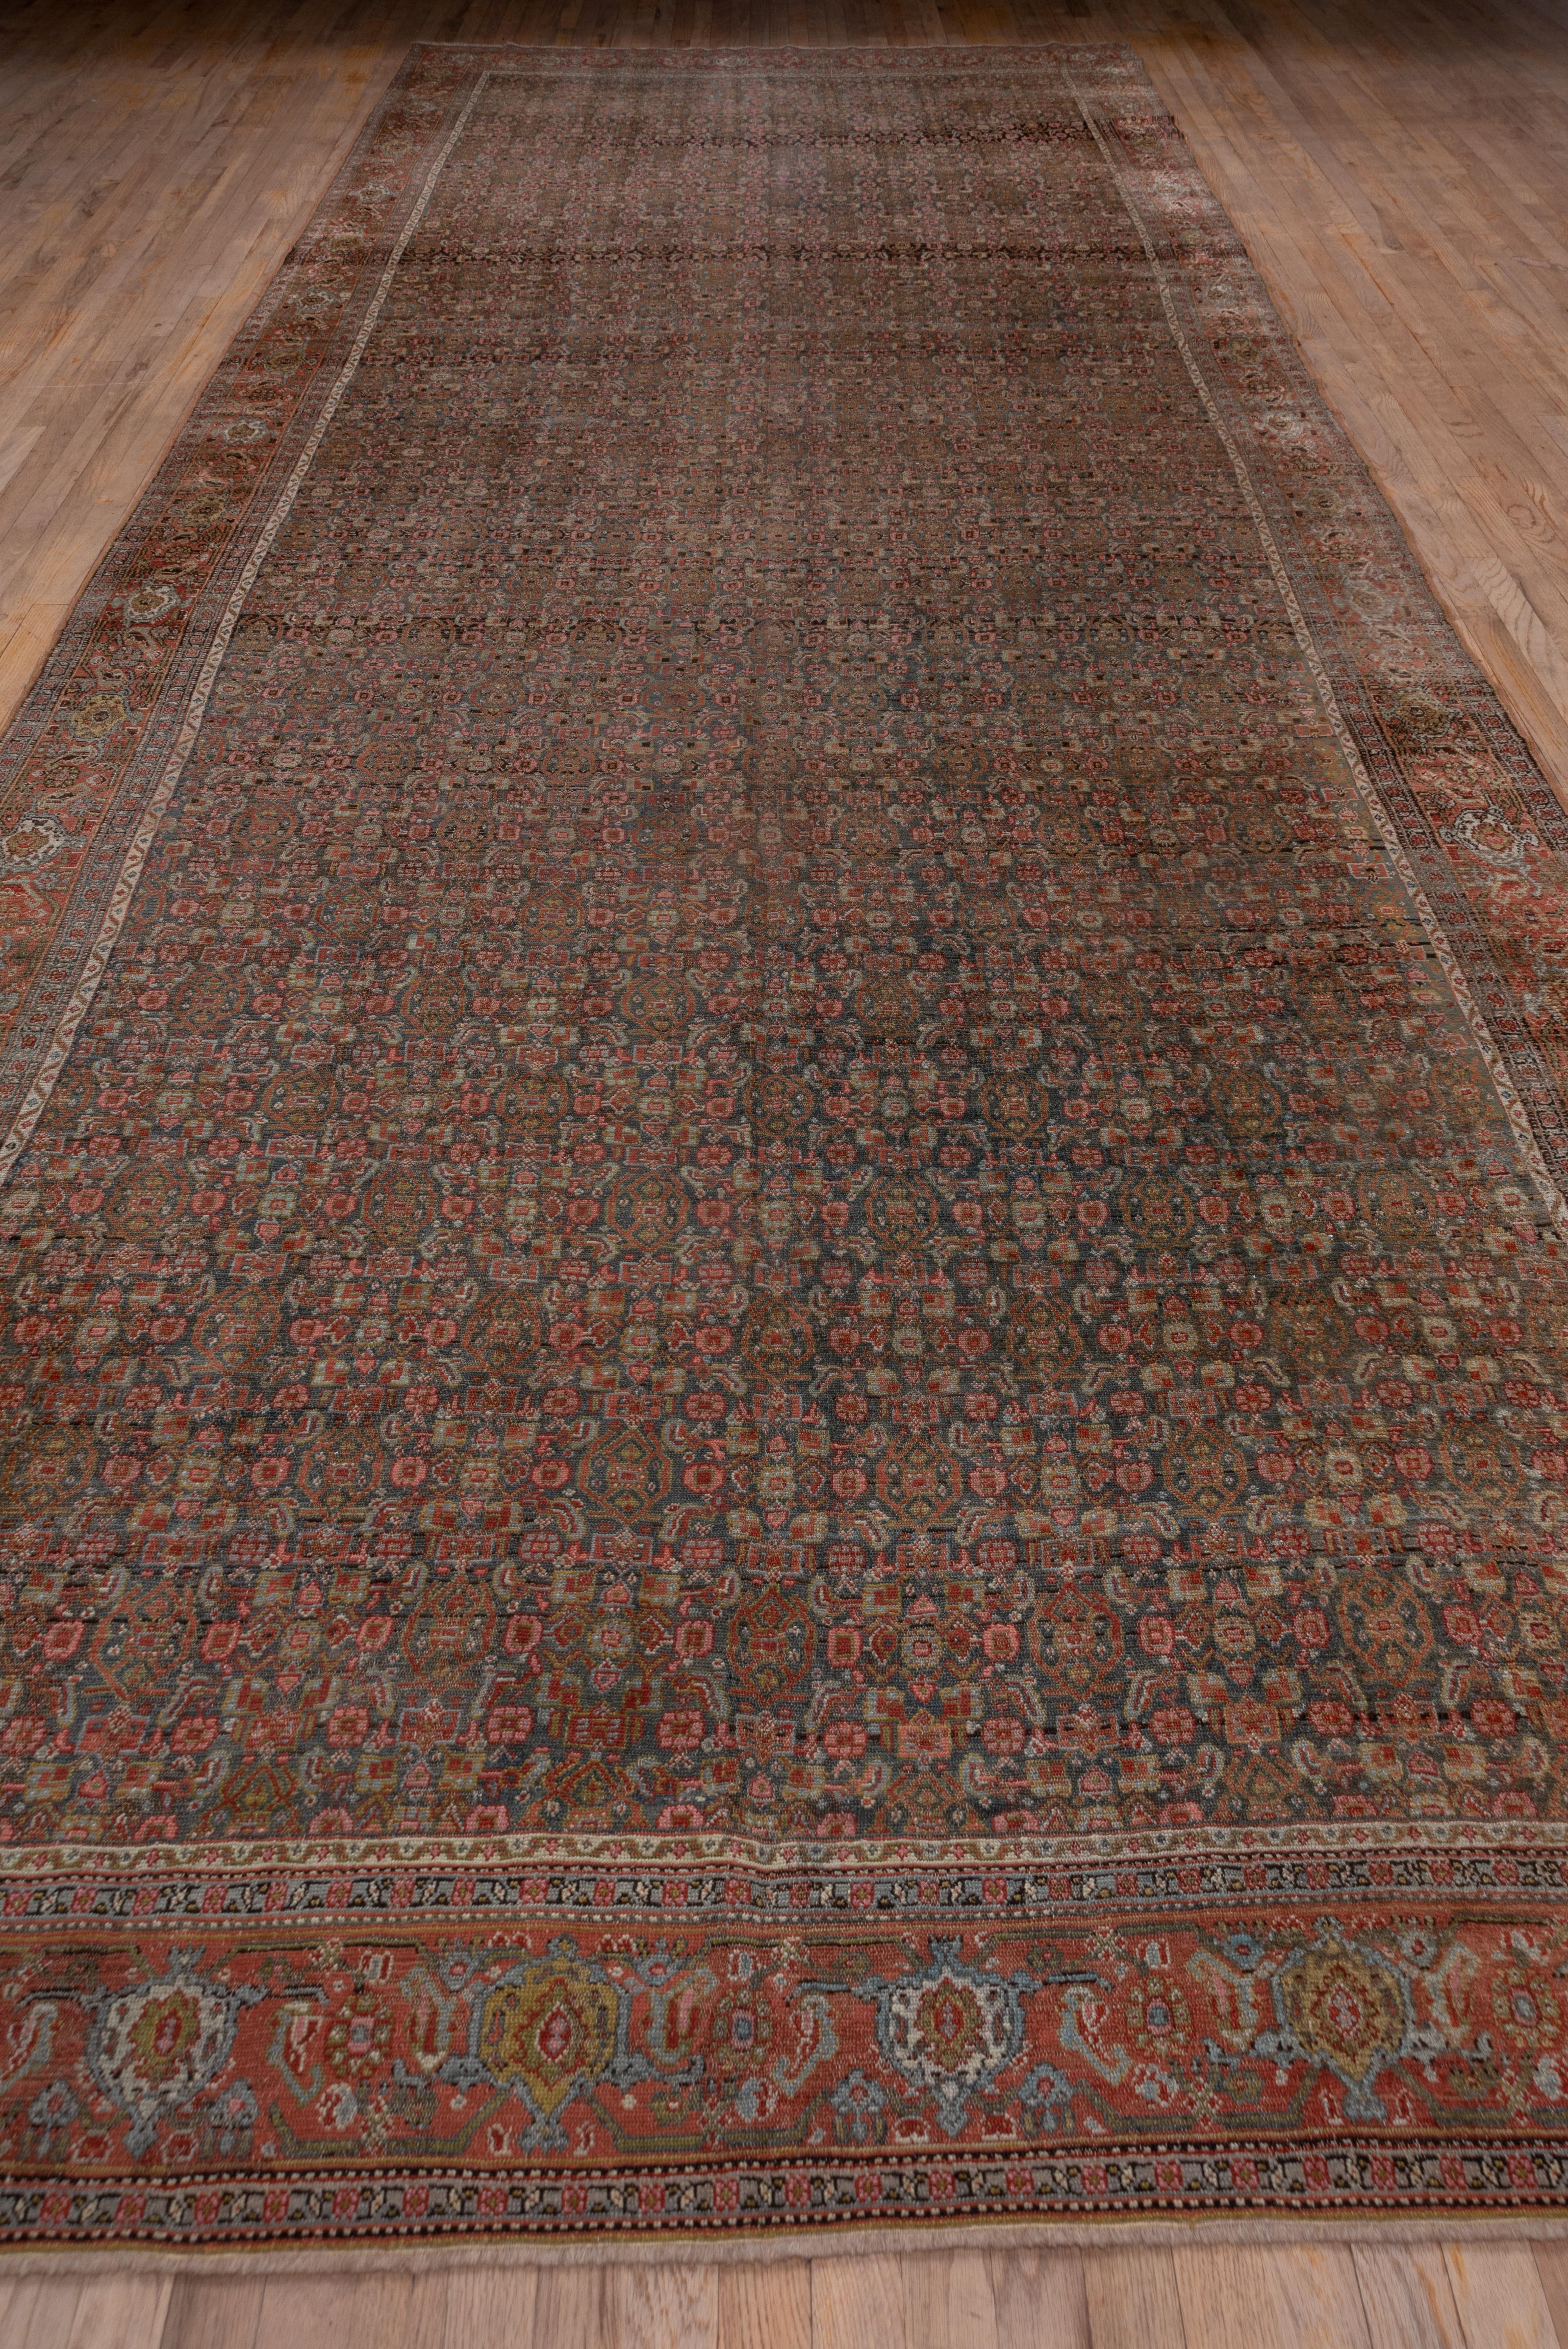 A compact small Herati design closely covers the well-abrashed warm medium brown field and gives a subtle diagonal over-pattern. The medium brown border shows reversing turtle palmettes with ecru and straw accents. This NW Persian Kurdish town